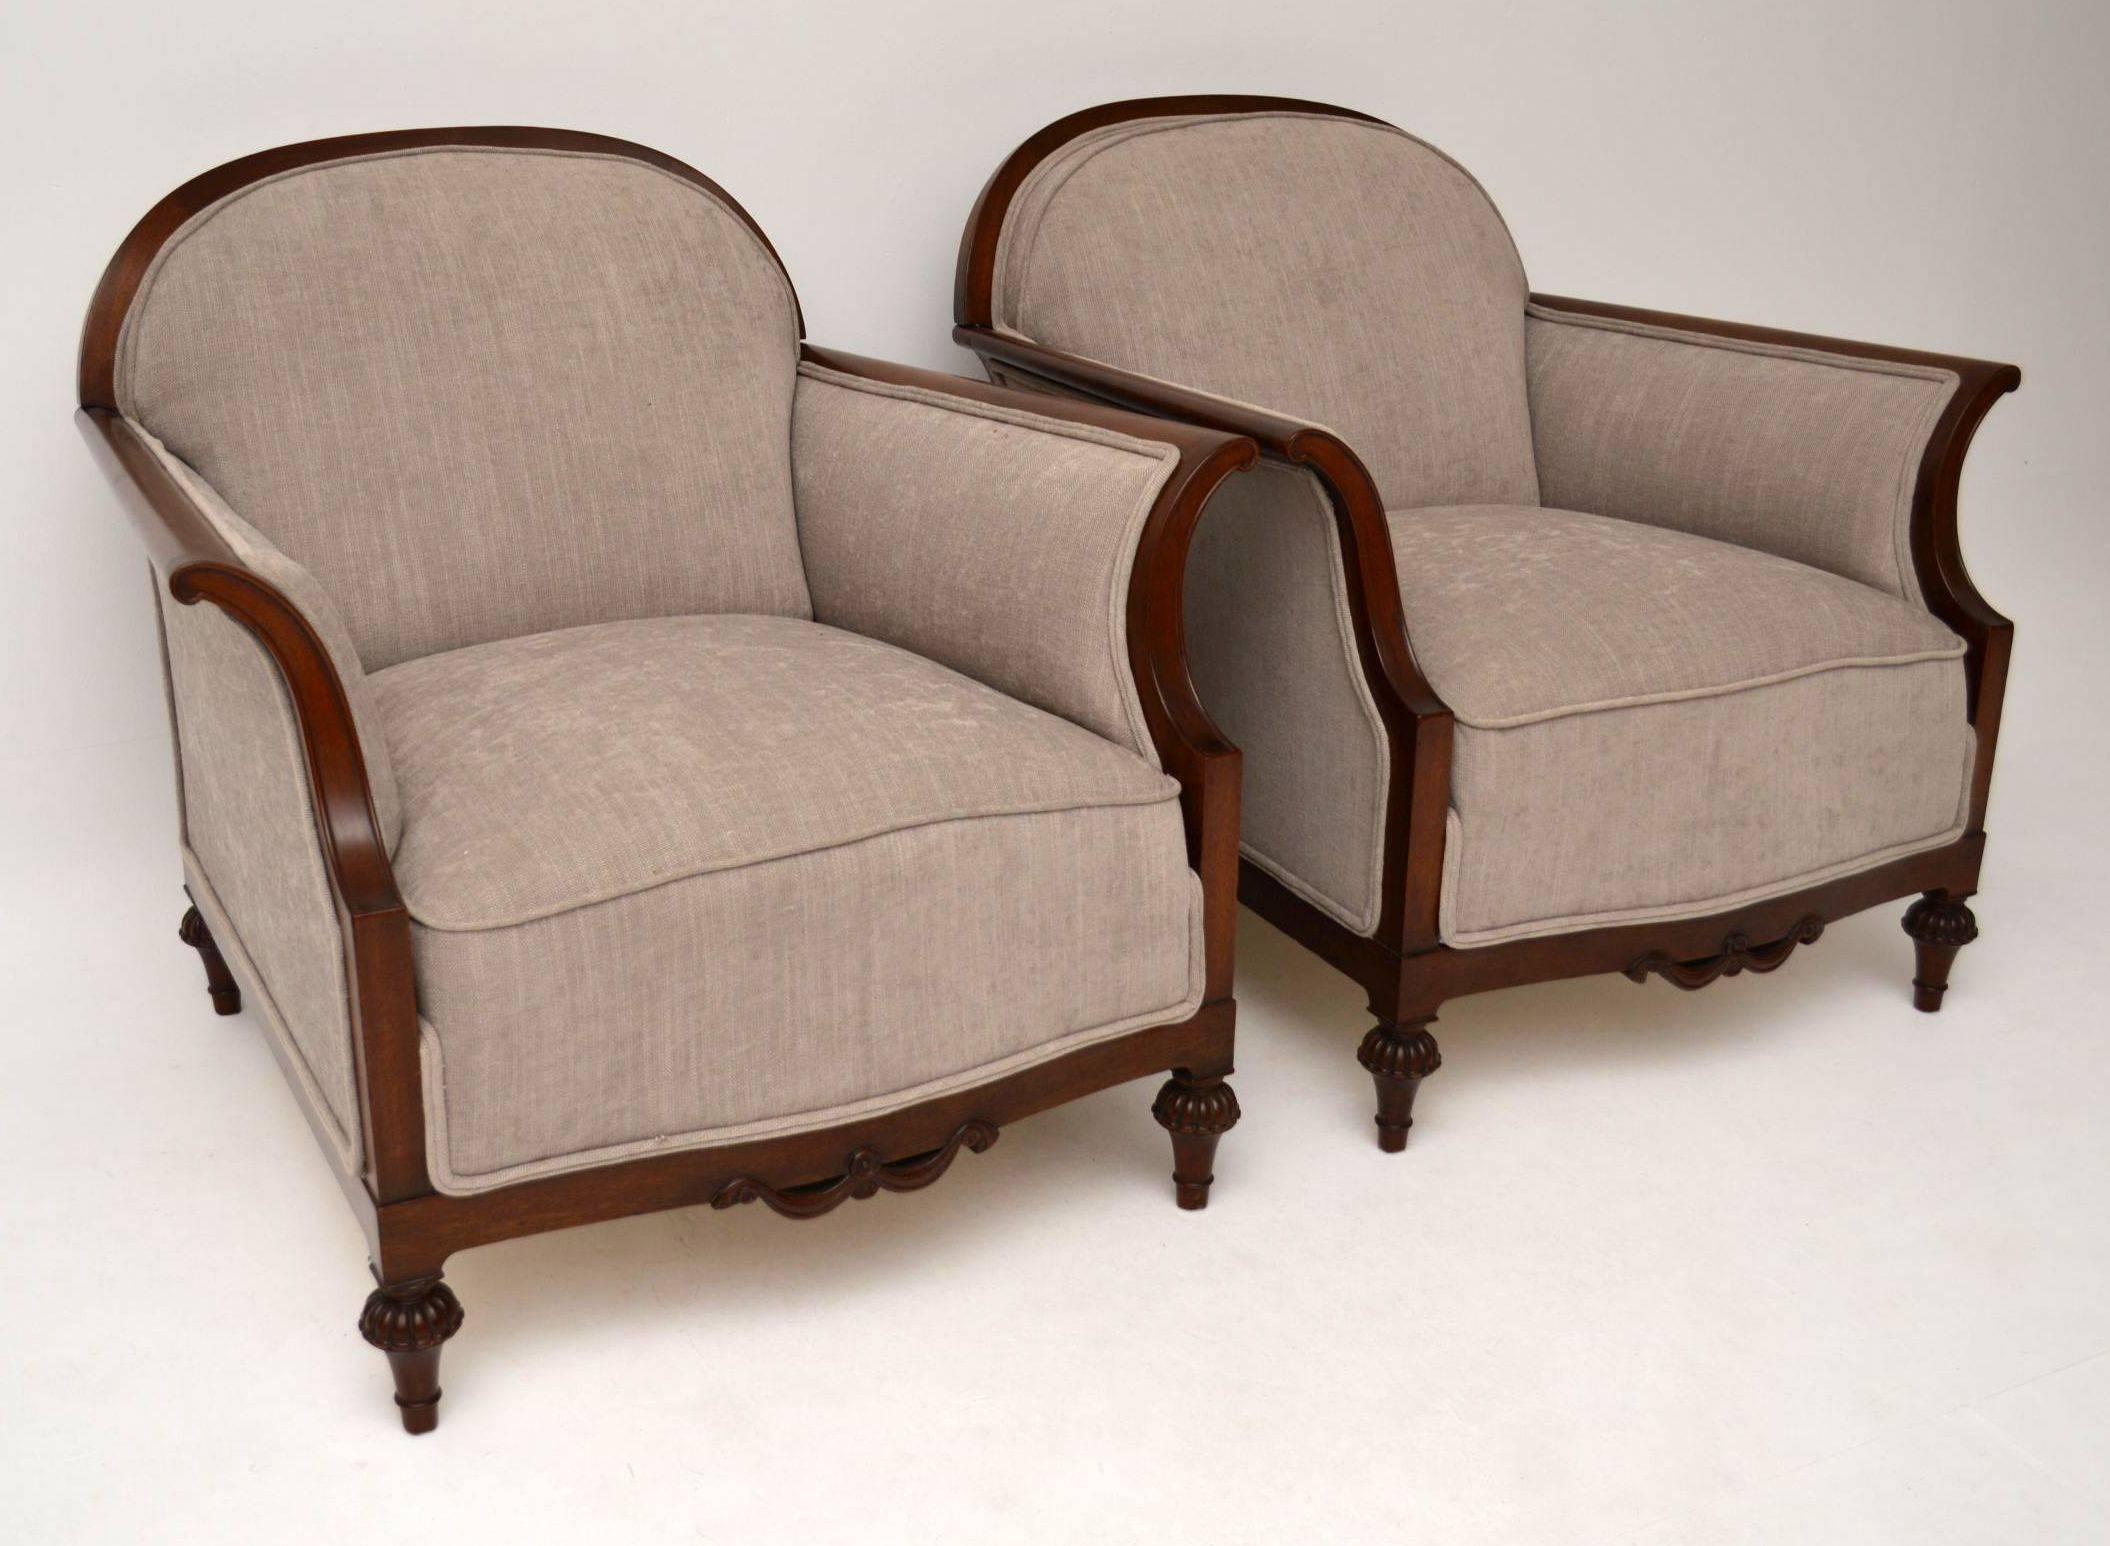 Fine quality pair of antique Swedish upholstered mahogany armchairs of generous proportions and extremely comfortable. They have just come over from Sweden, been polished & re-upholstered in a neutral stain resistant fabric. I would date them to